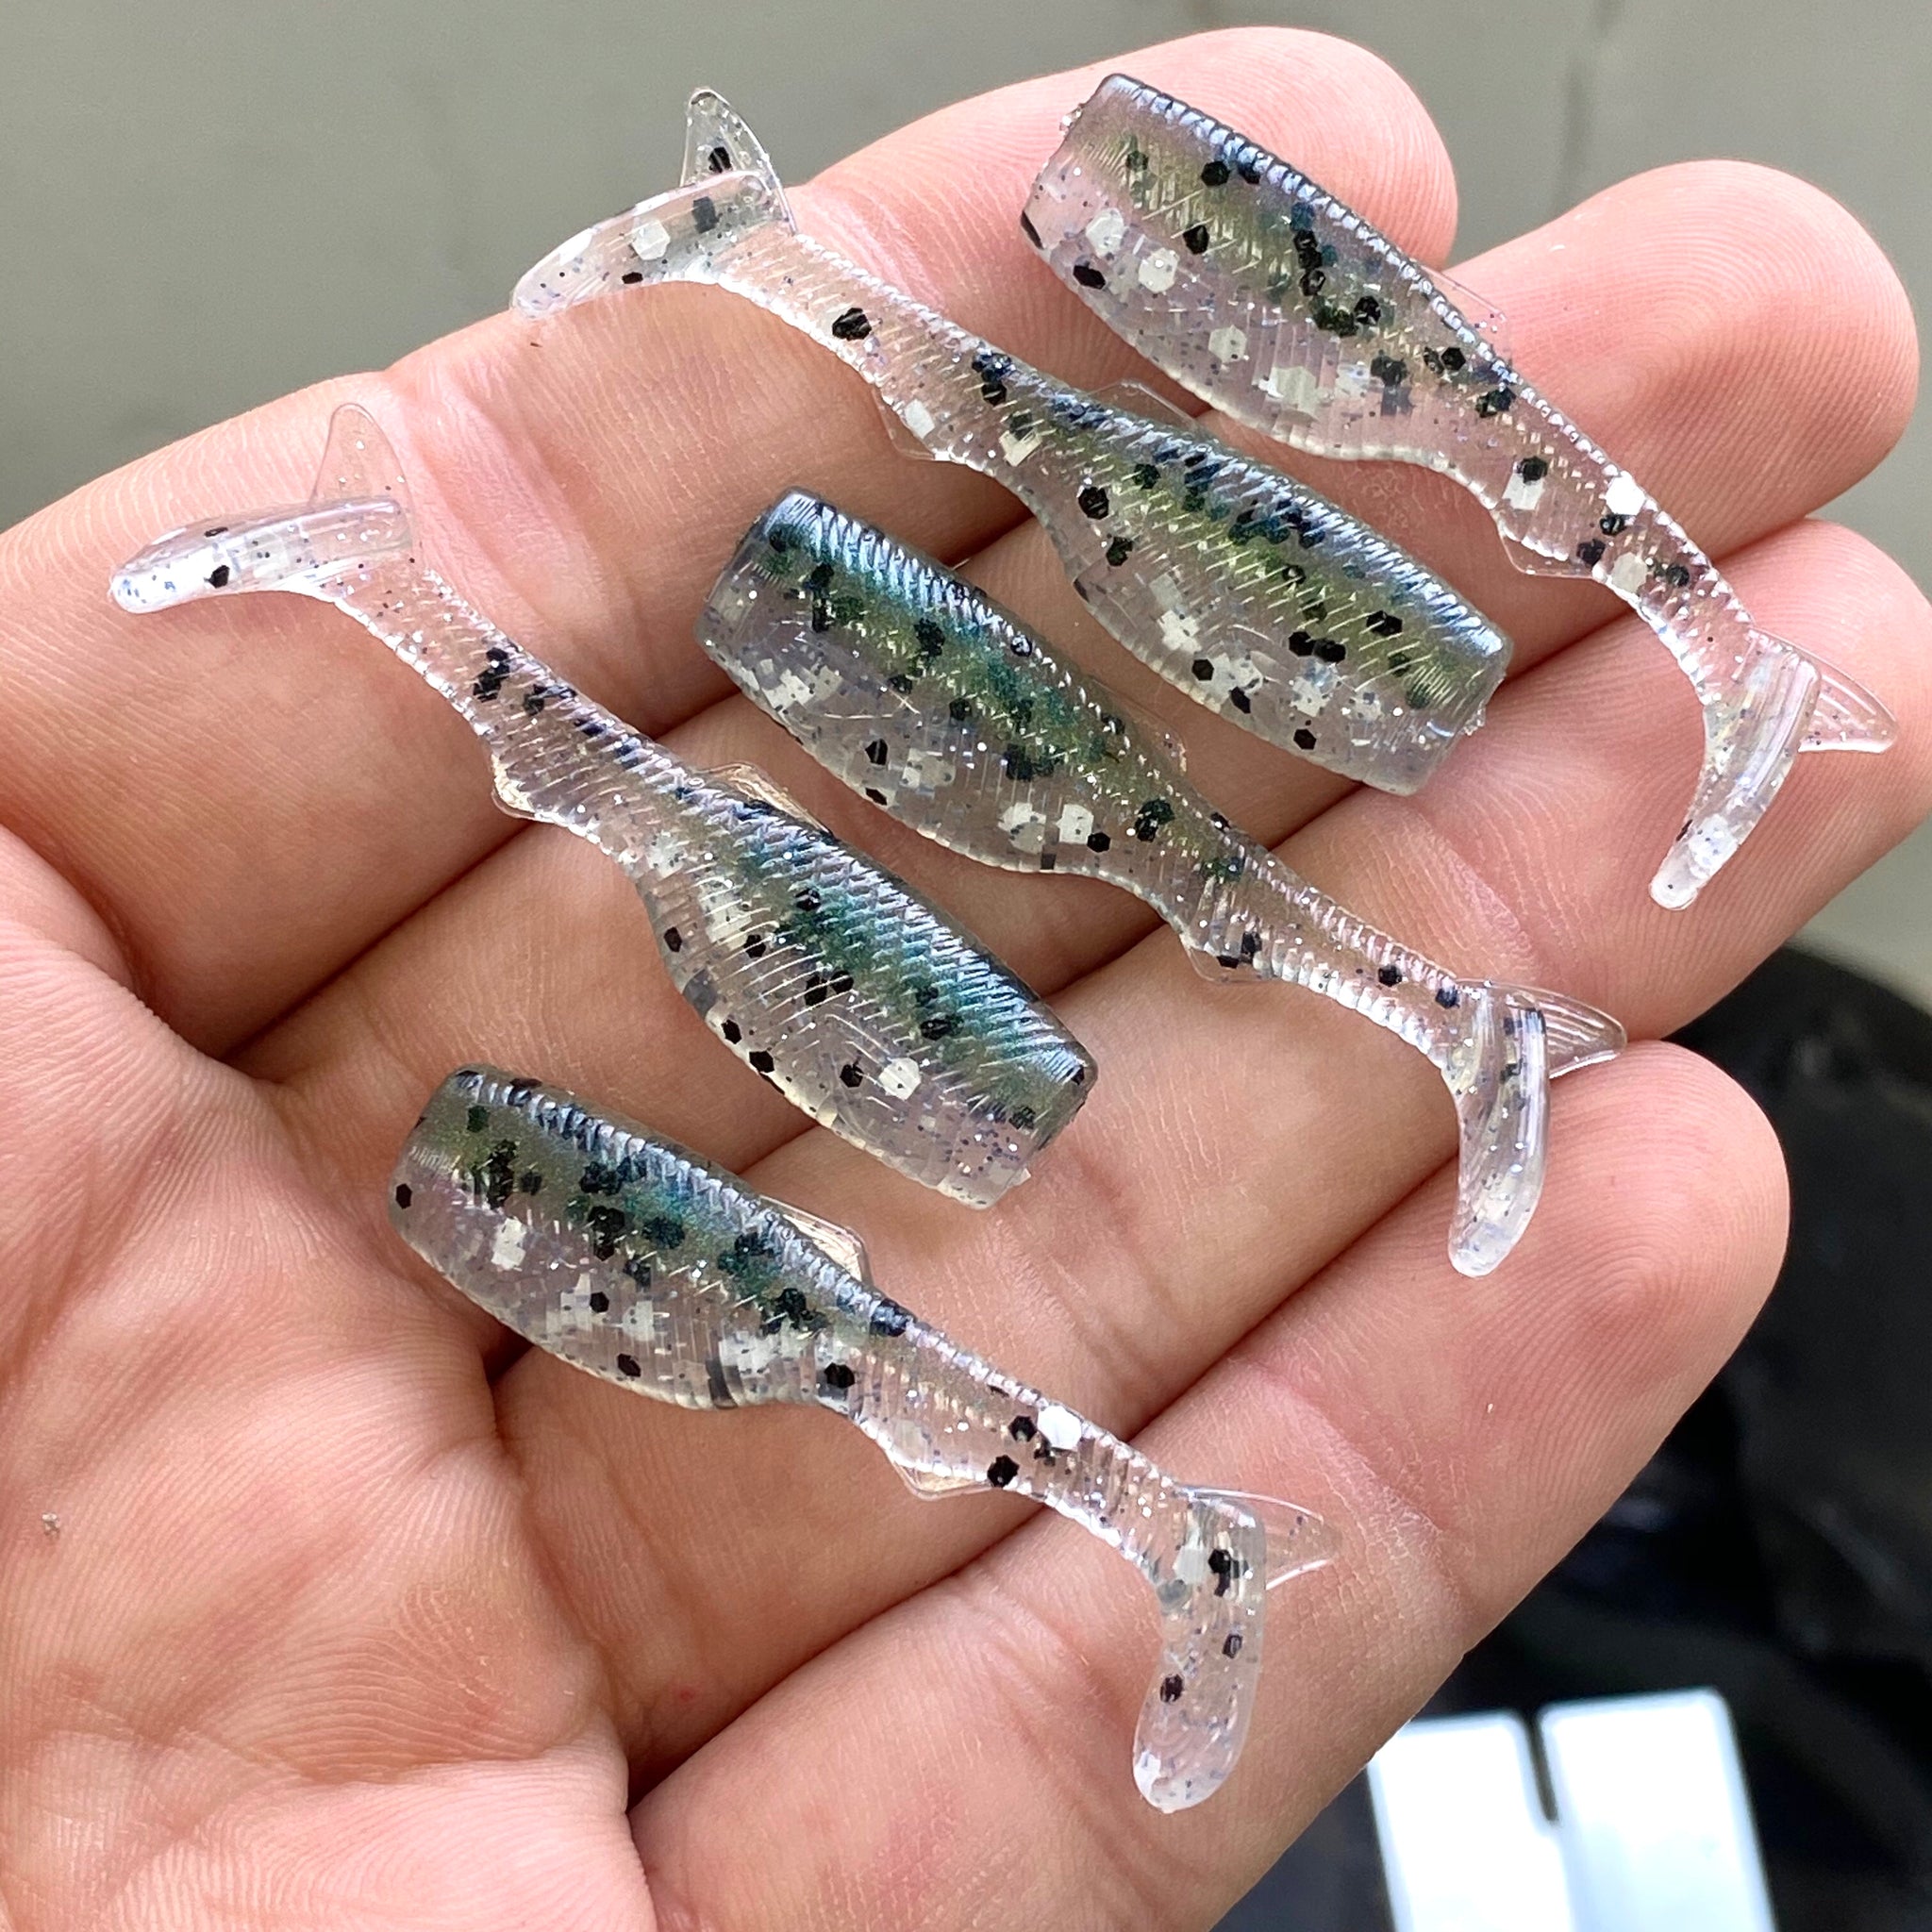  Fishing Soft Bait Mold Available in Different Models and Size  - Artificial Stone Fishing Injection Molds, Durable Soft Fishing Lures